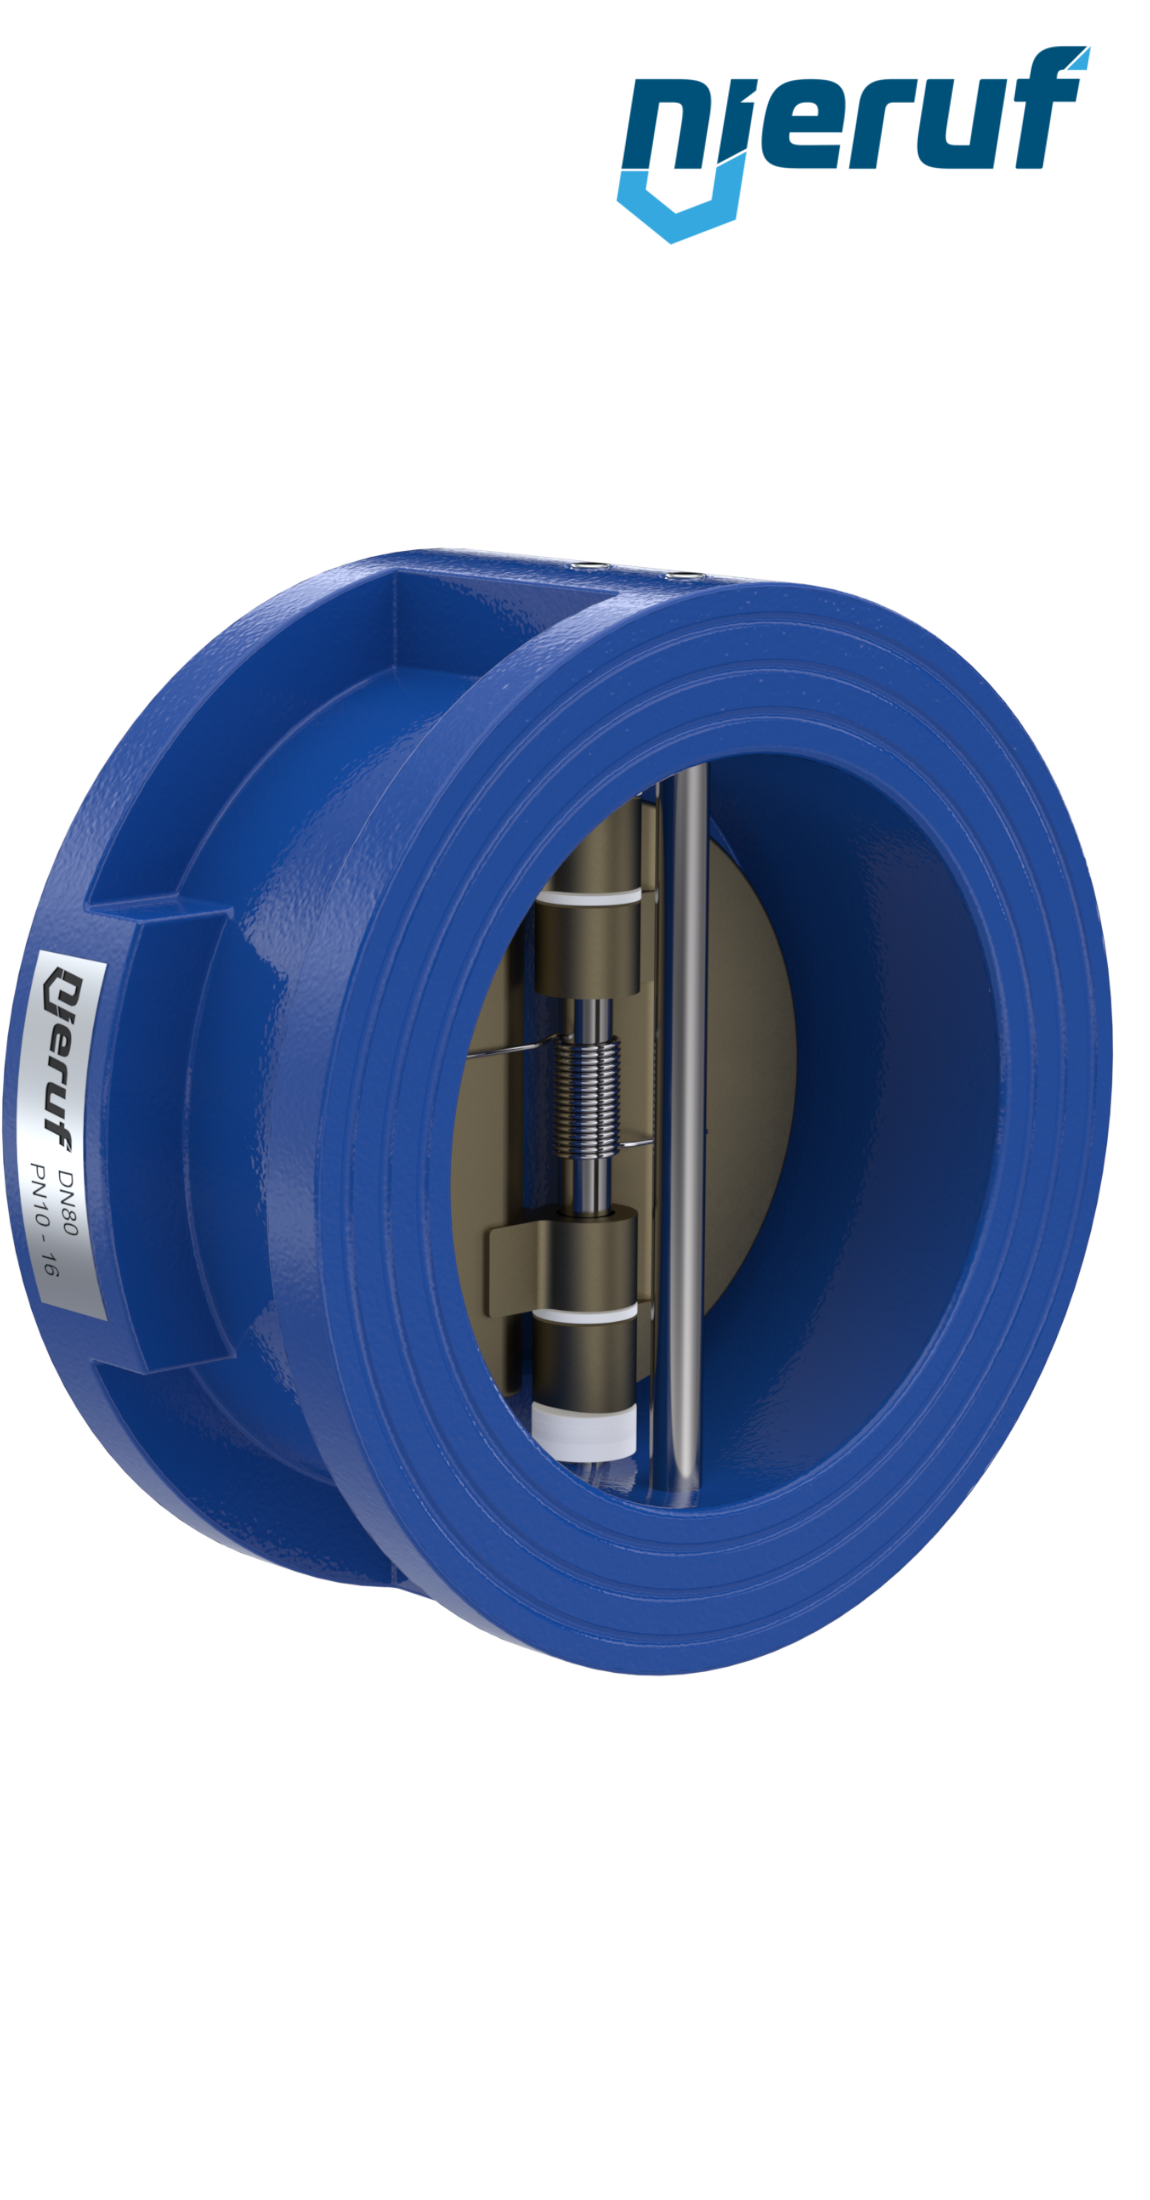 dual plate check valve DN80 DR04 GGG40 epoxyd plated blue 180µm EPDM